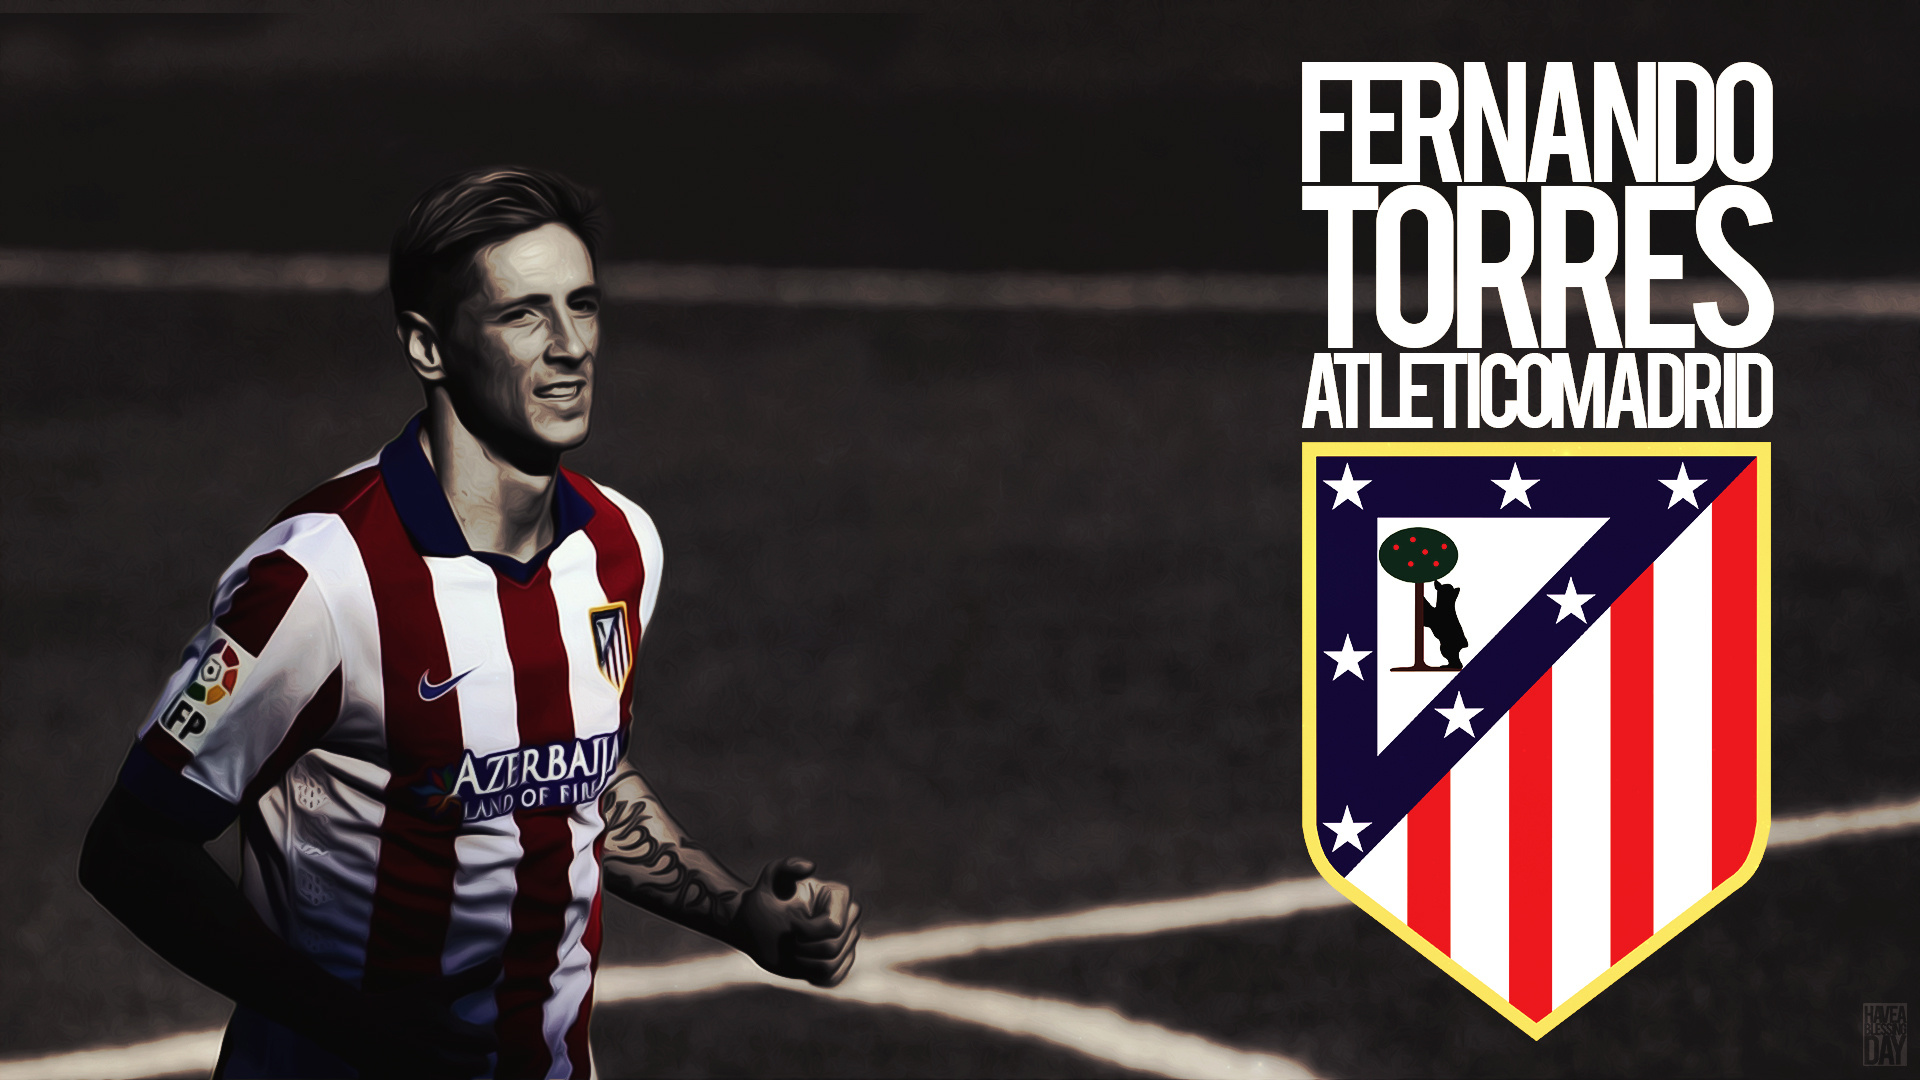 Atletico Madrid: Fernando Torres, The club won the European Cup Winners' Cup in 1962. 1920x1080 Full HD Background.